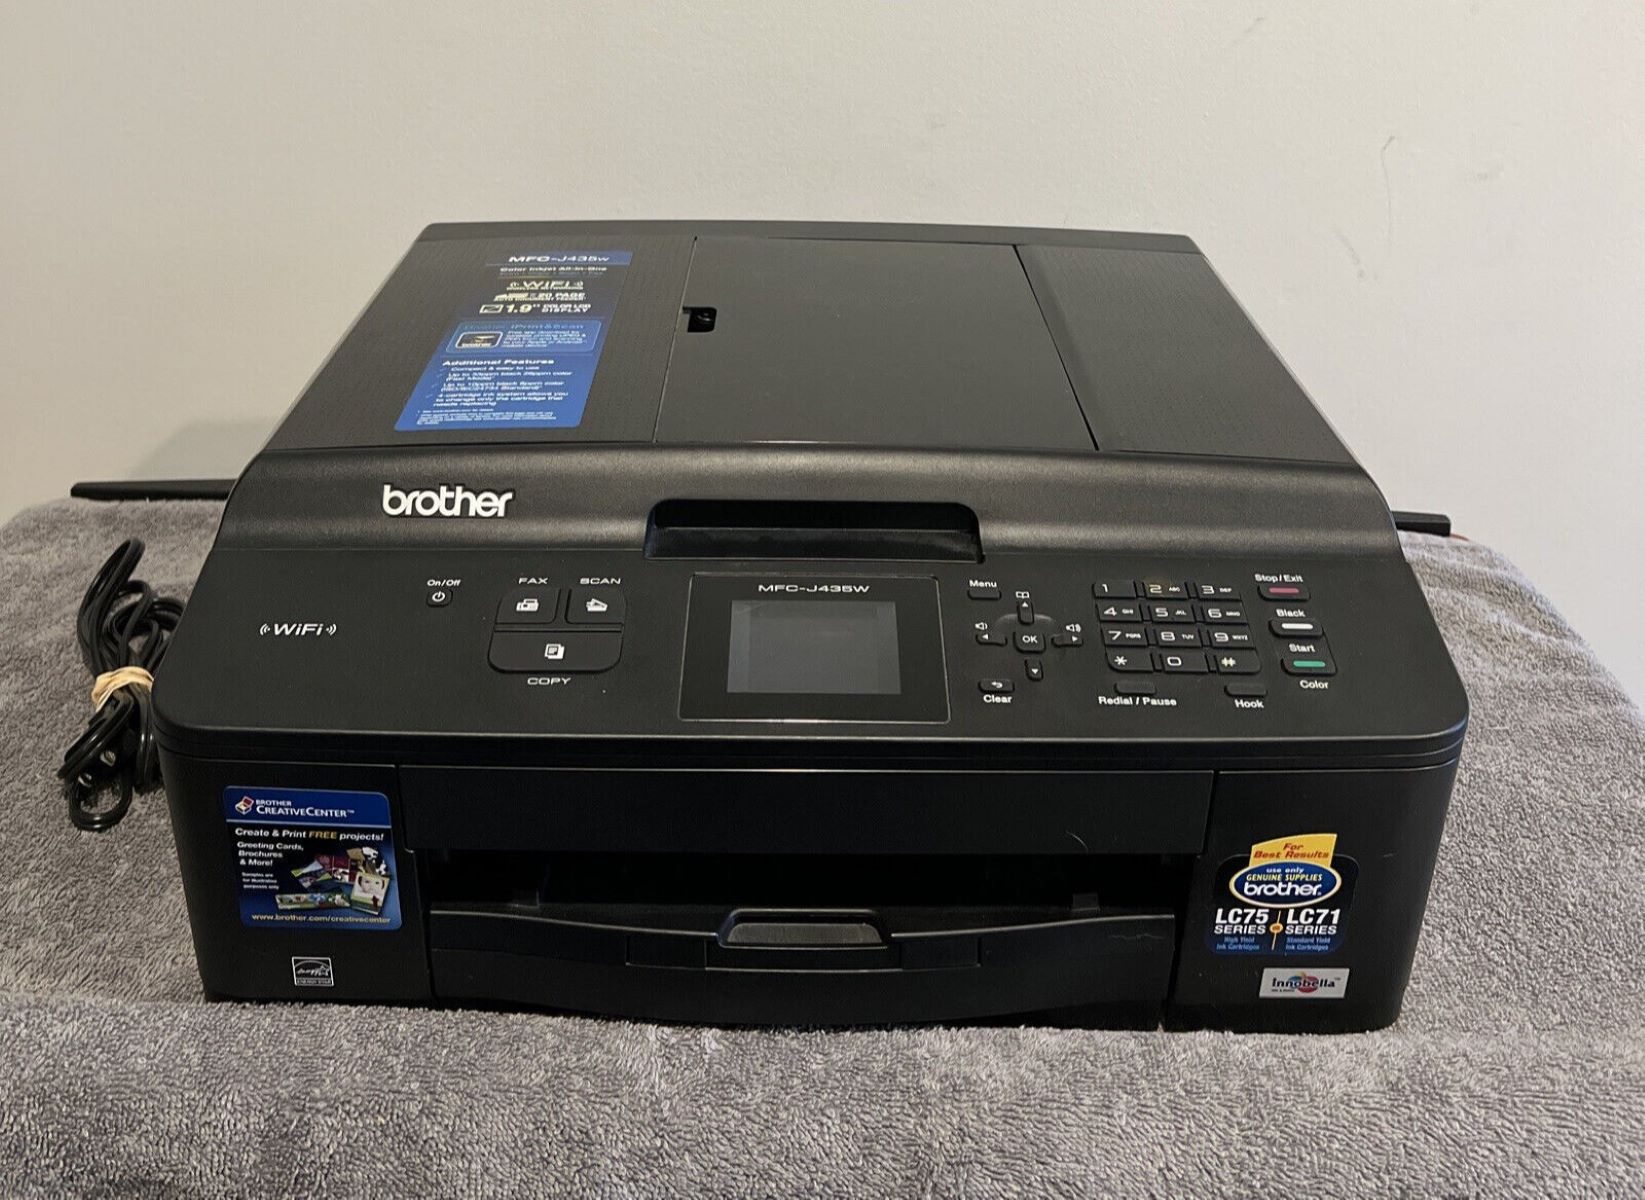 How To Clean Printer Head On Brother MFC J430W